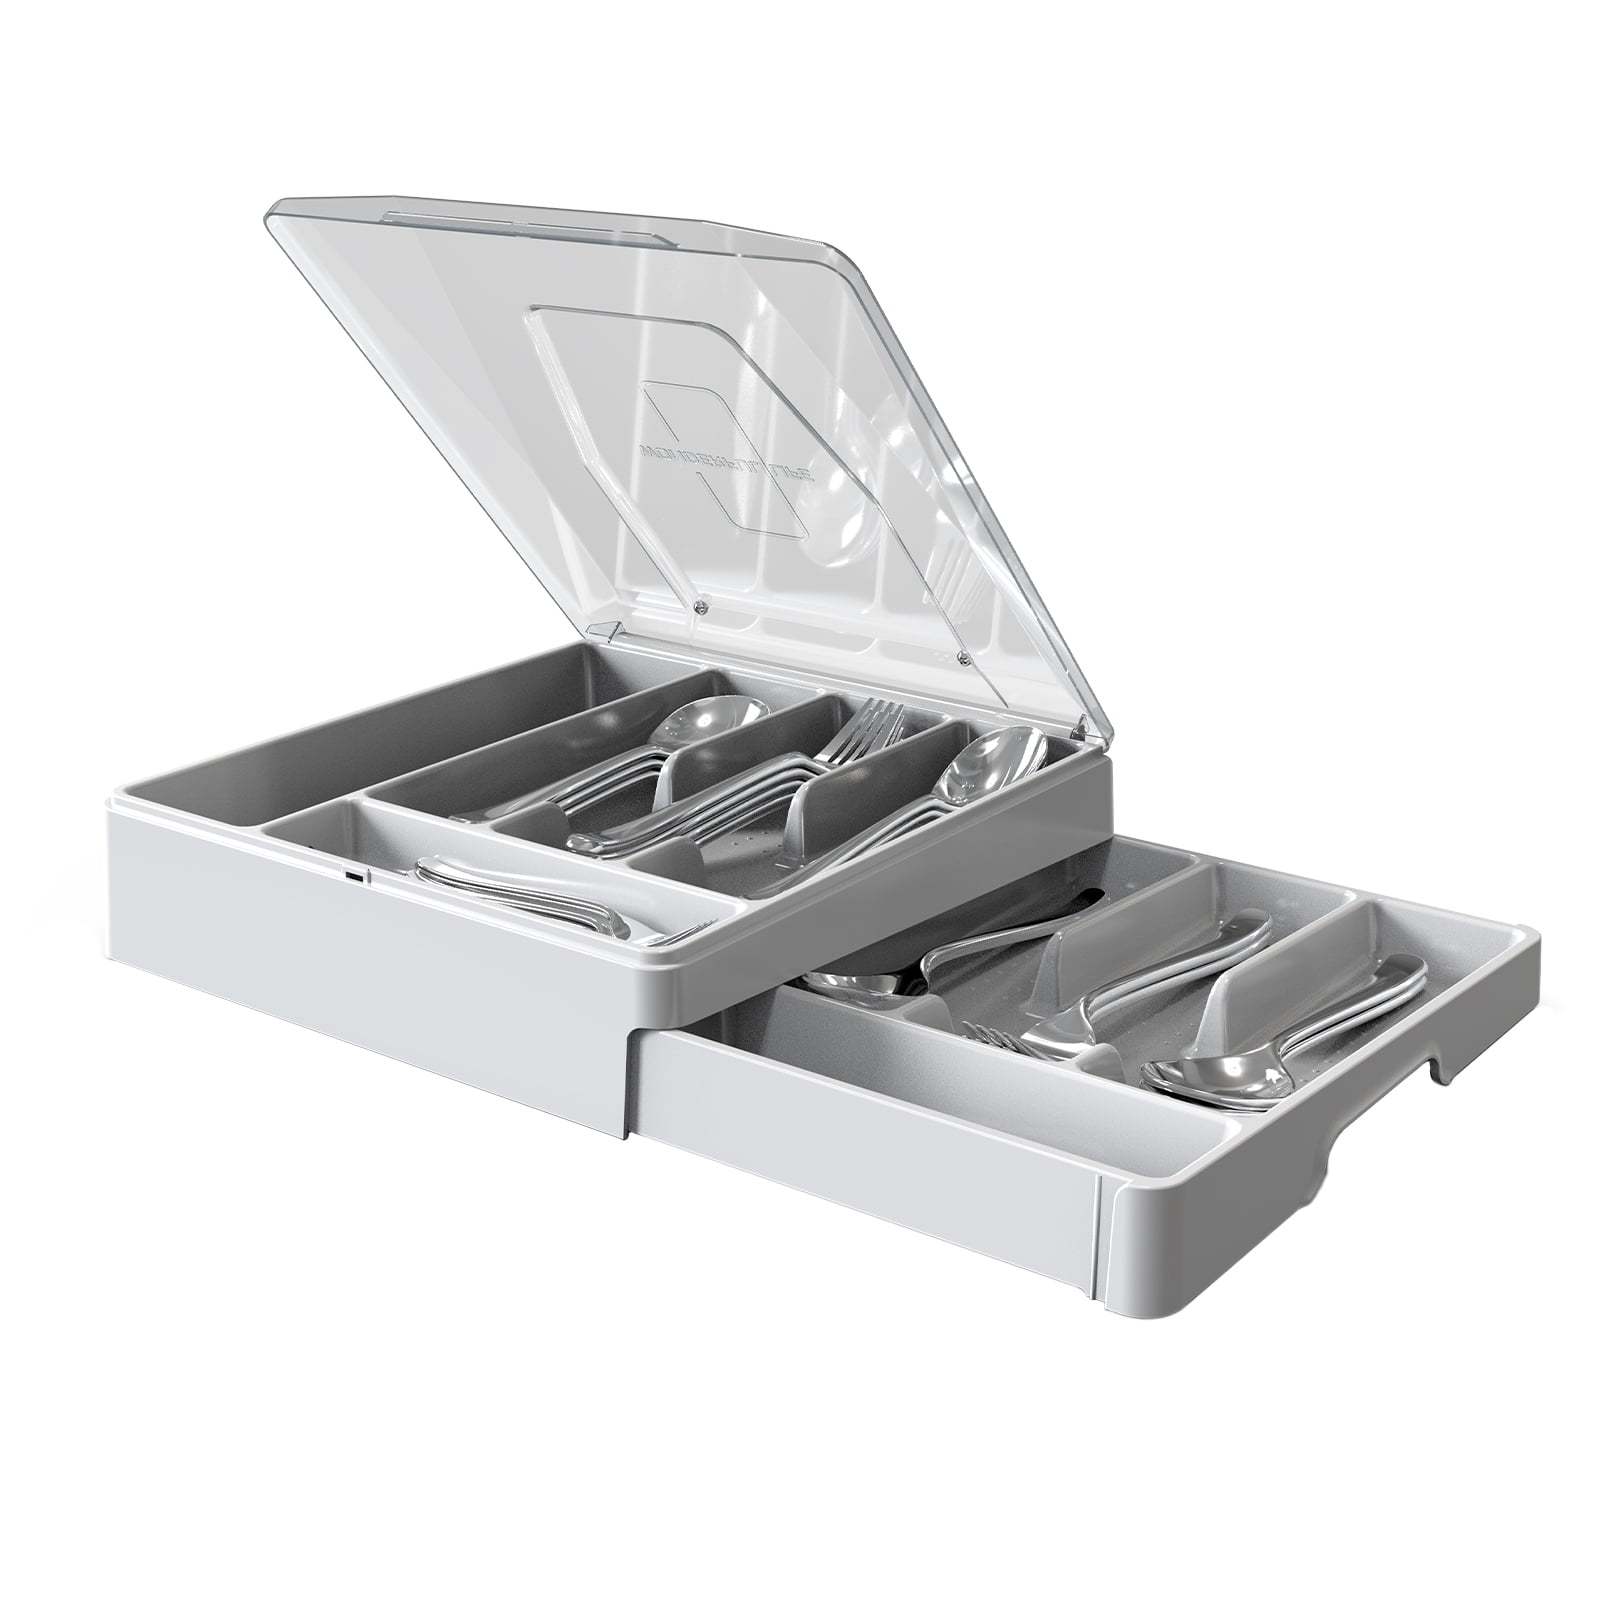 OMAIA Kitchen Drawer Organizer, 2-Tier Knife Holder - Expandable Cutlery Tray for Silverware, Flatware, Utensils - Non-BPA Plastic, Dishwasher-Safe